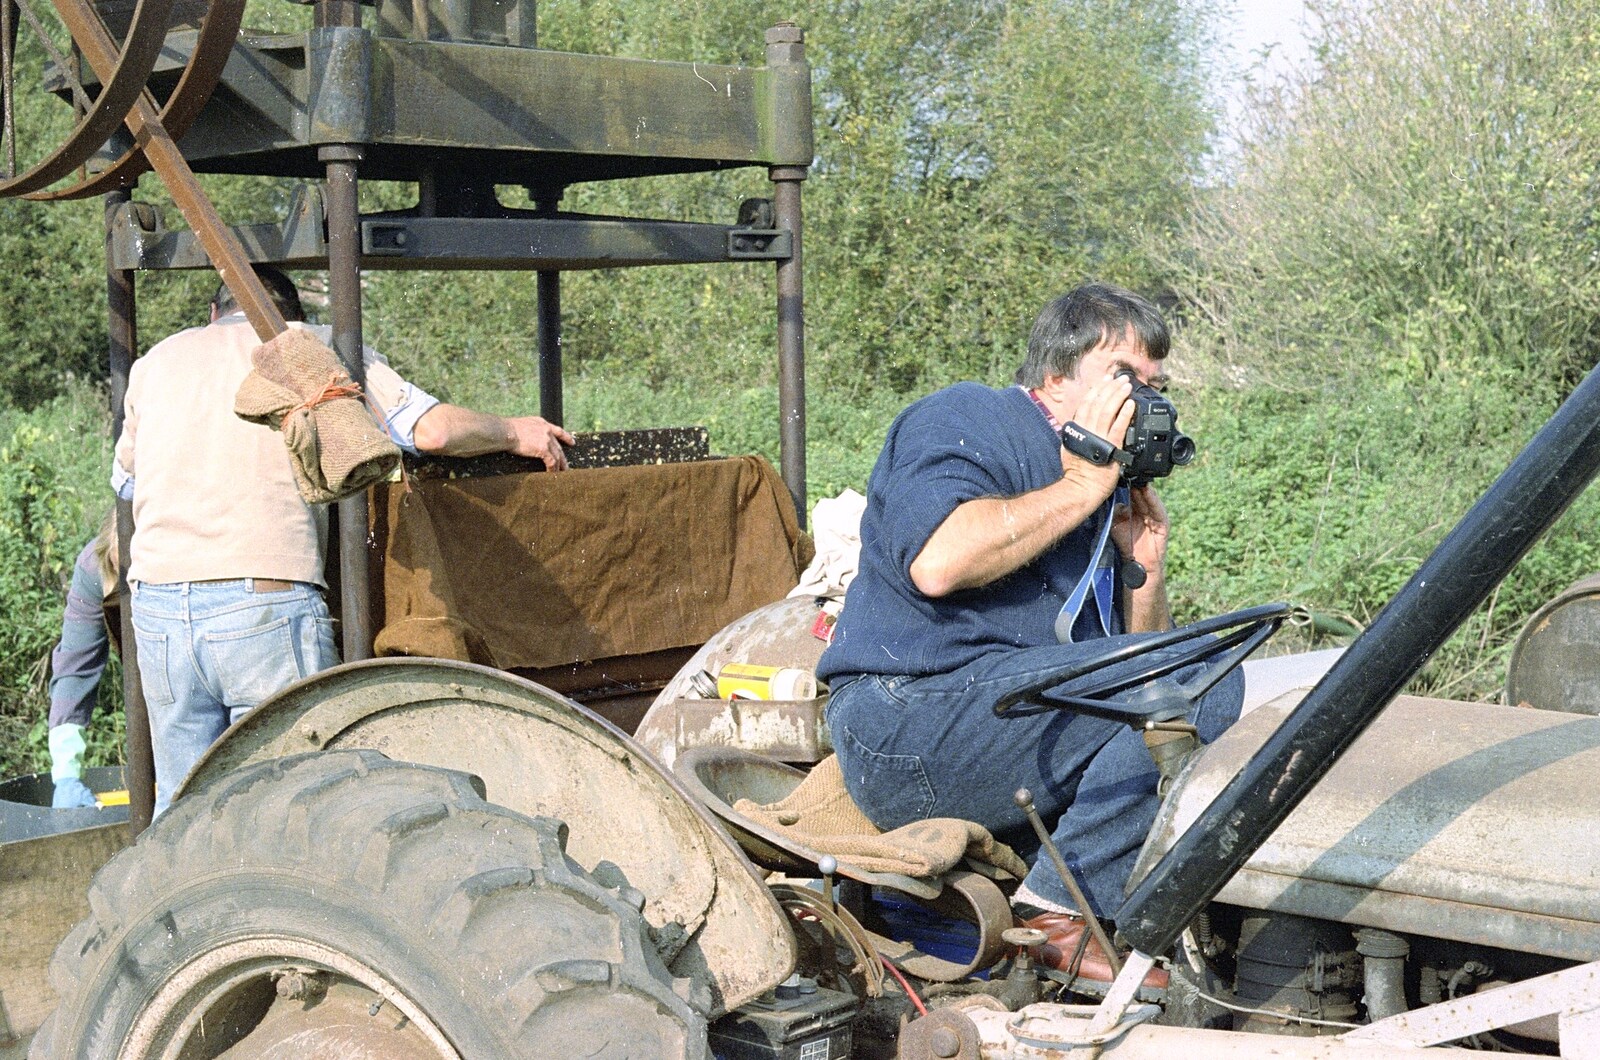 Cider Making (without Rosie), Stuston, Suffolk - 23rd September 1994: Corky on video camera